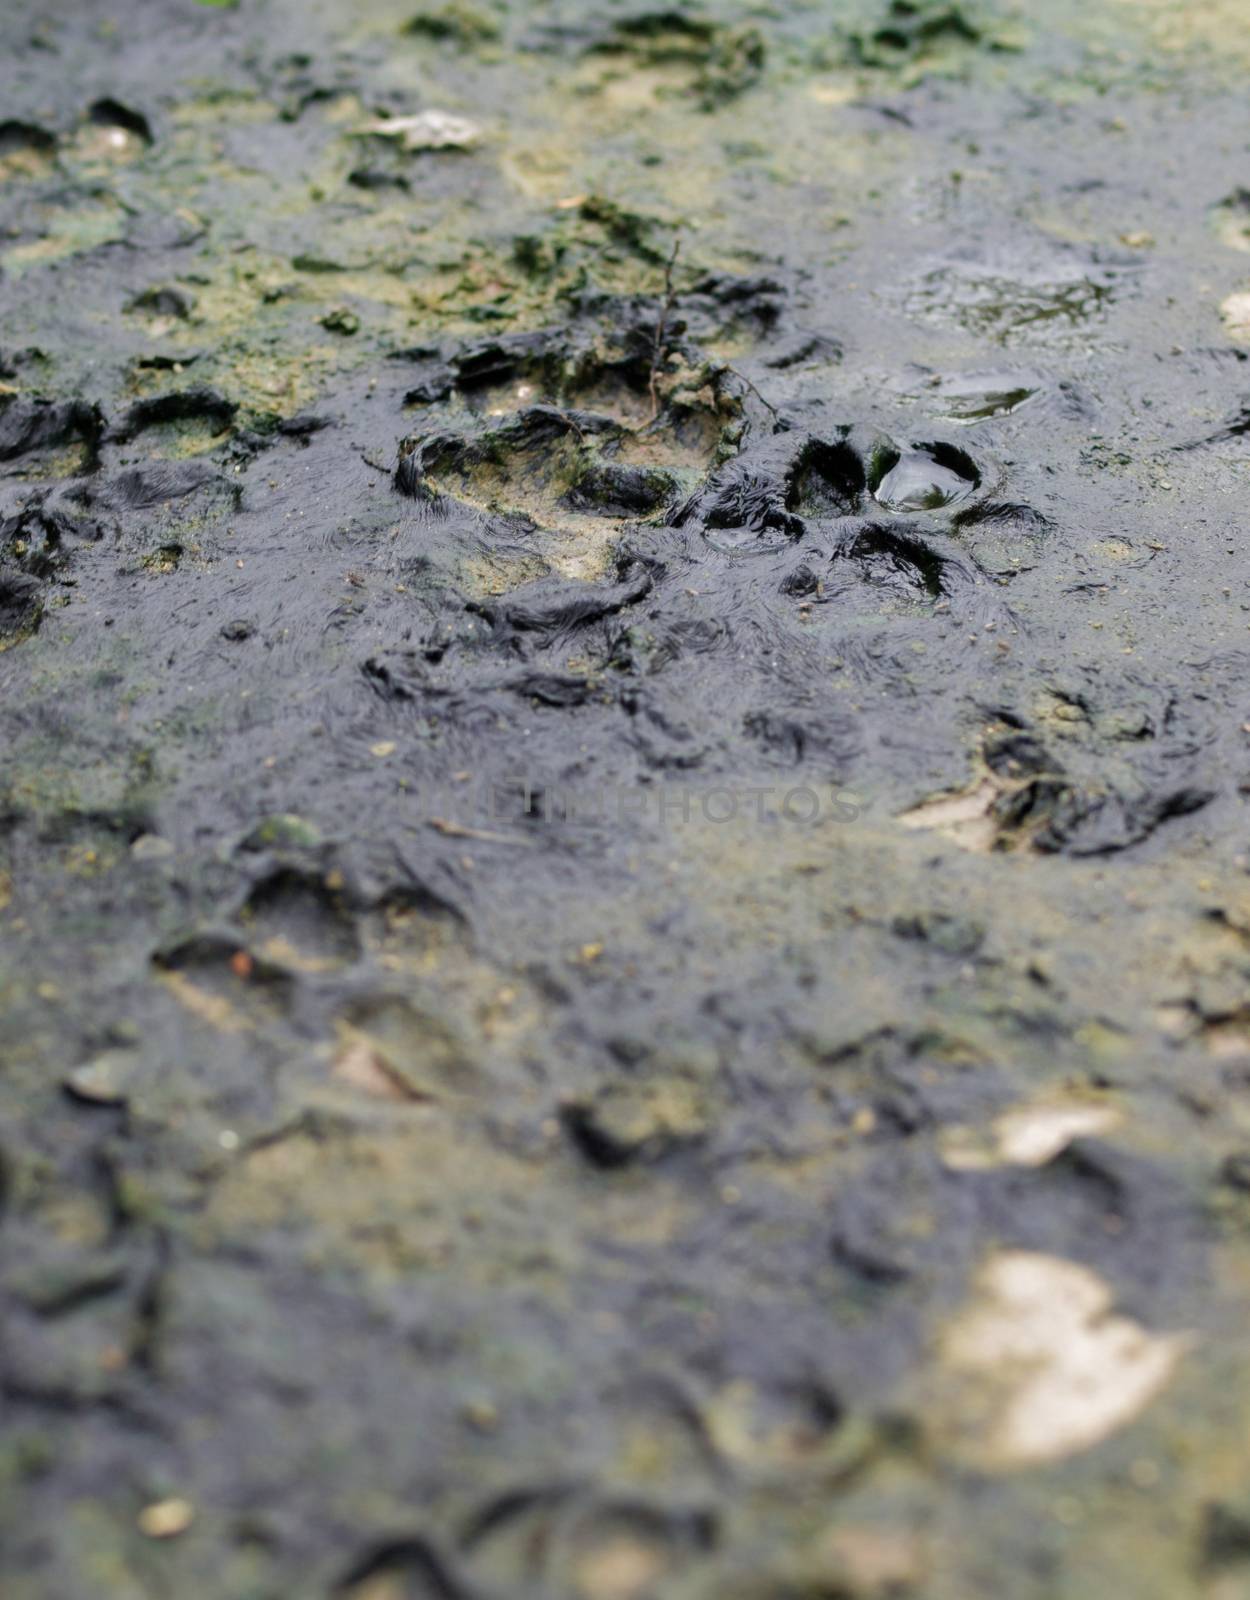 DOG TRACKS IN THE MUD by PrettyTG